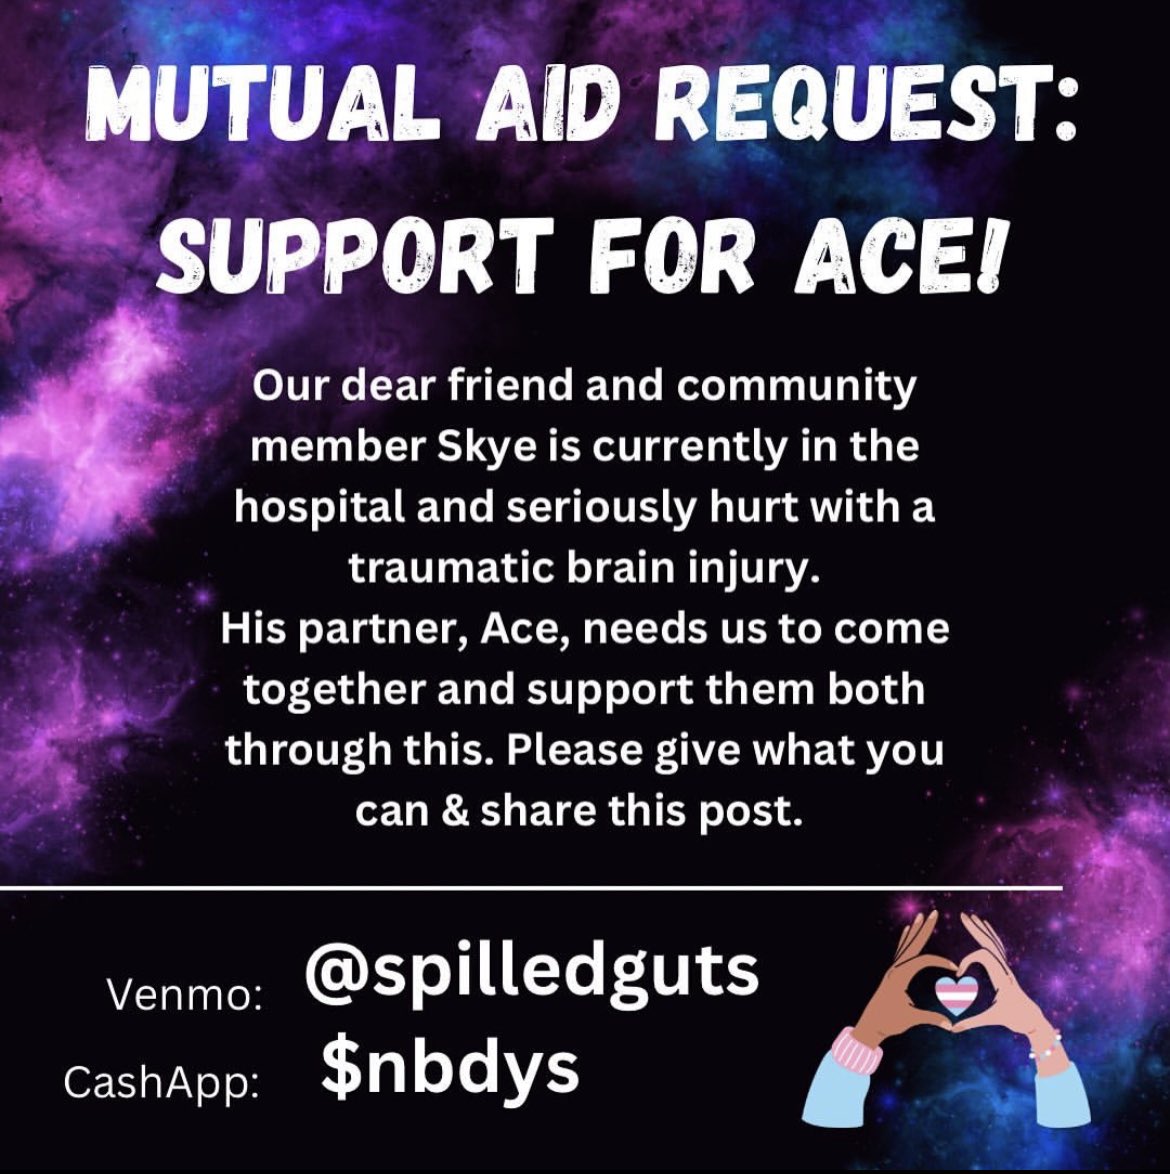 Skye passed away over the weekend. Please consider donating to his partner Ace who is in need of a lot of support right now. Money should be the last thing they’re worried about. 💔